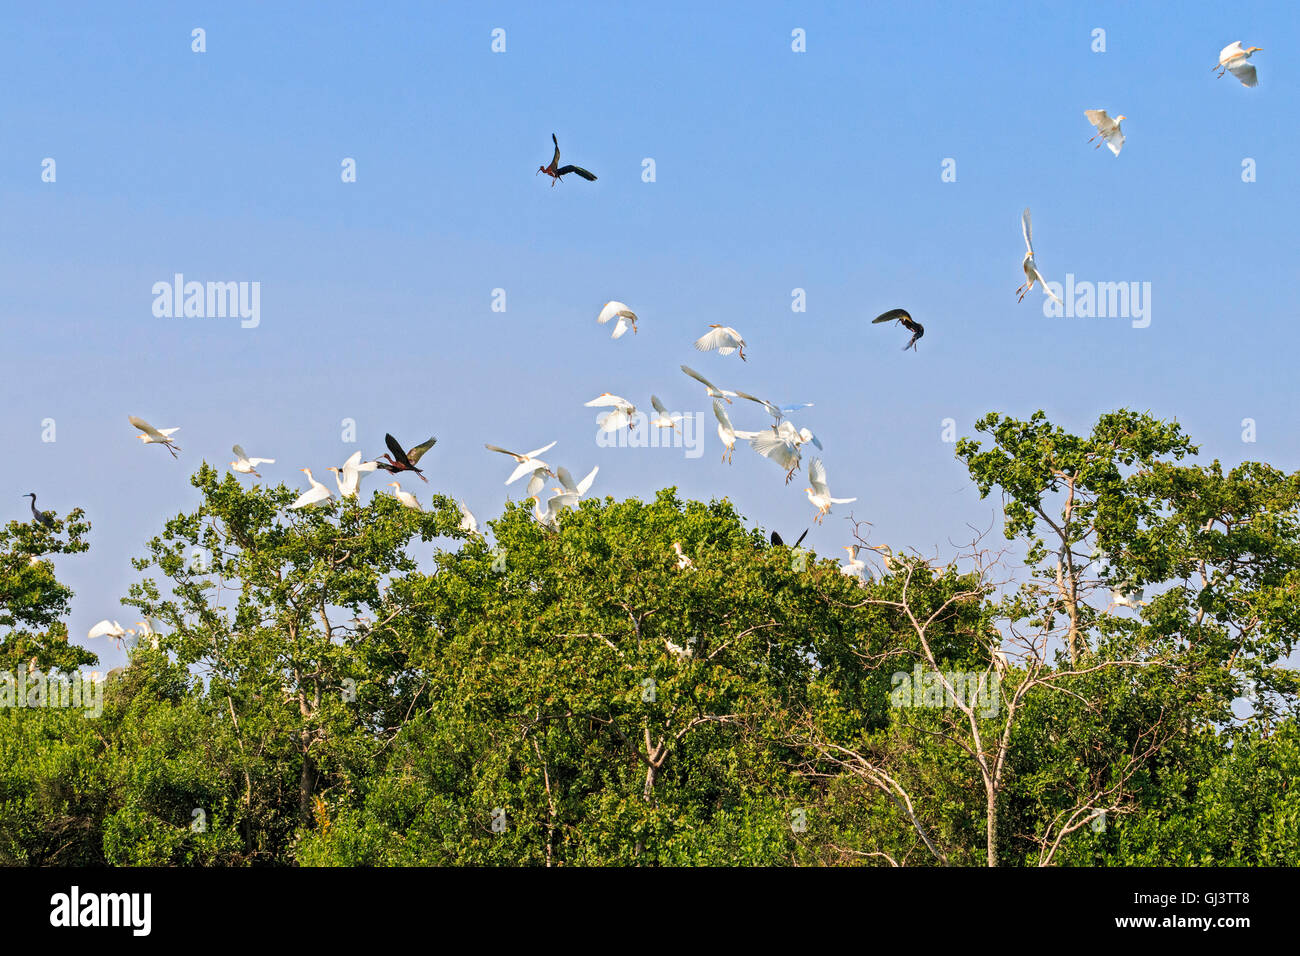 Cattle egrets and a glossy Ibis flying during a windy day. The cattle egret is a stocky heron. Stock Photo